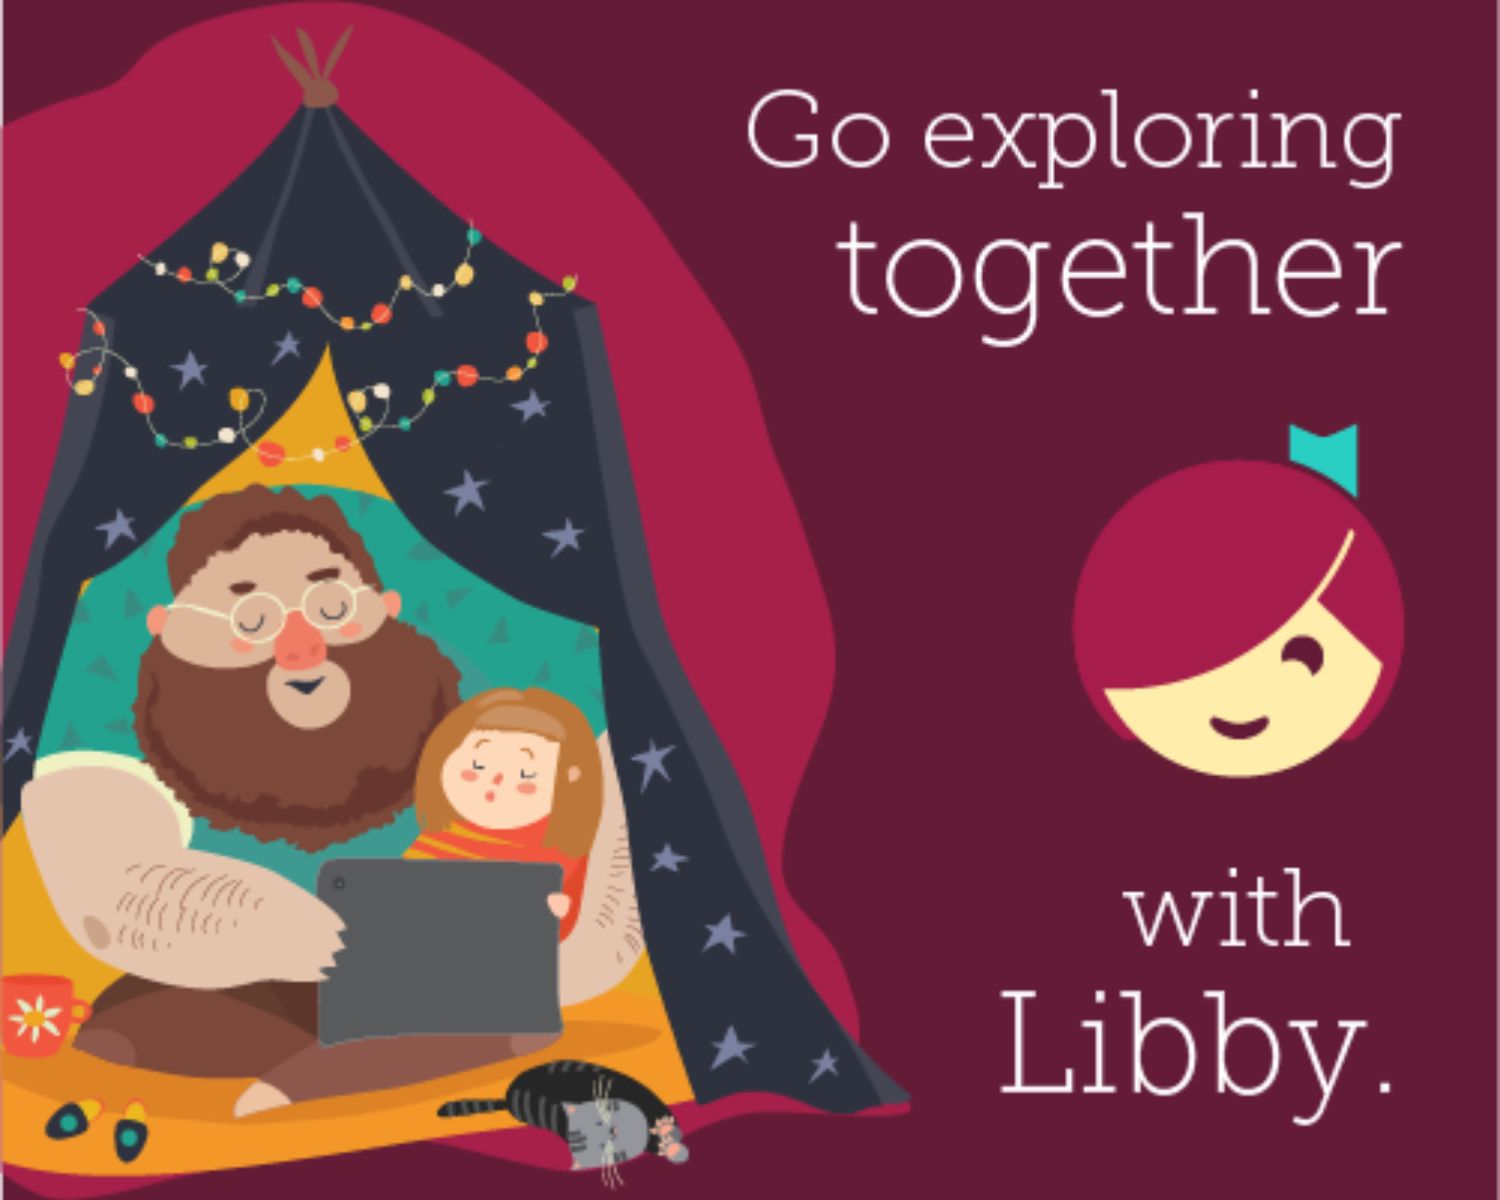 "Go exploring together with Libby" - graphic has a male guardian and child under a tent reading a book and has a maroon background